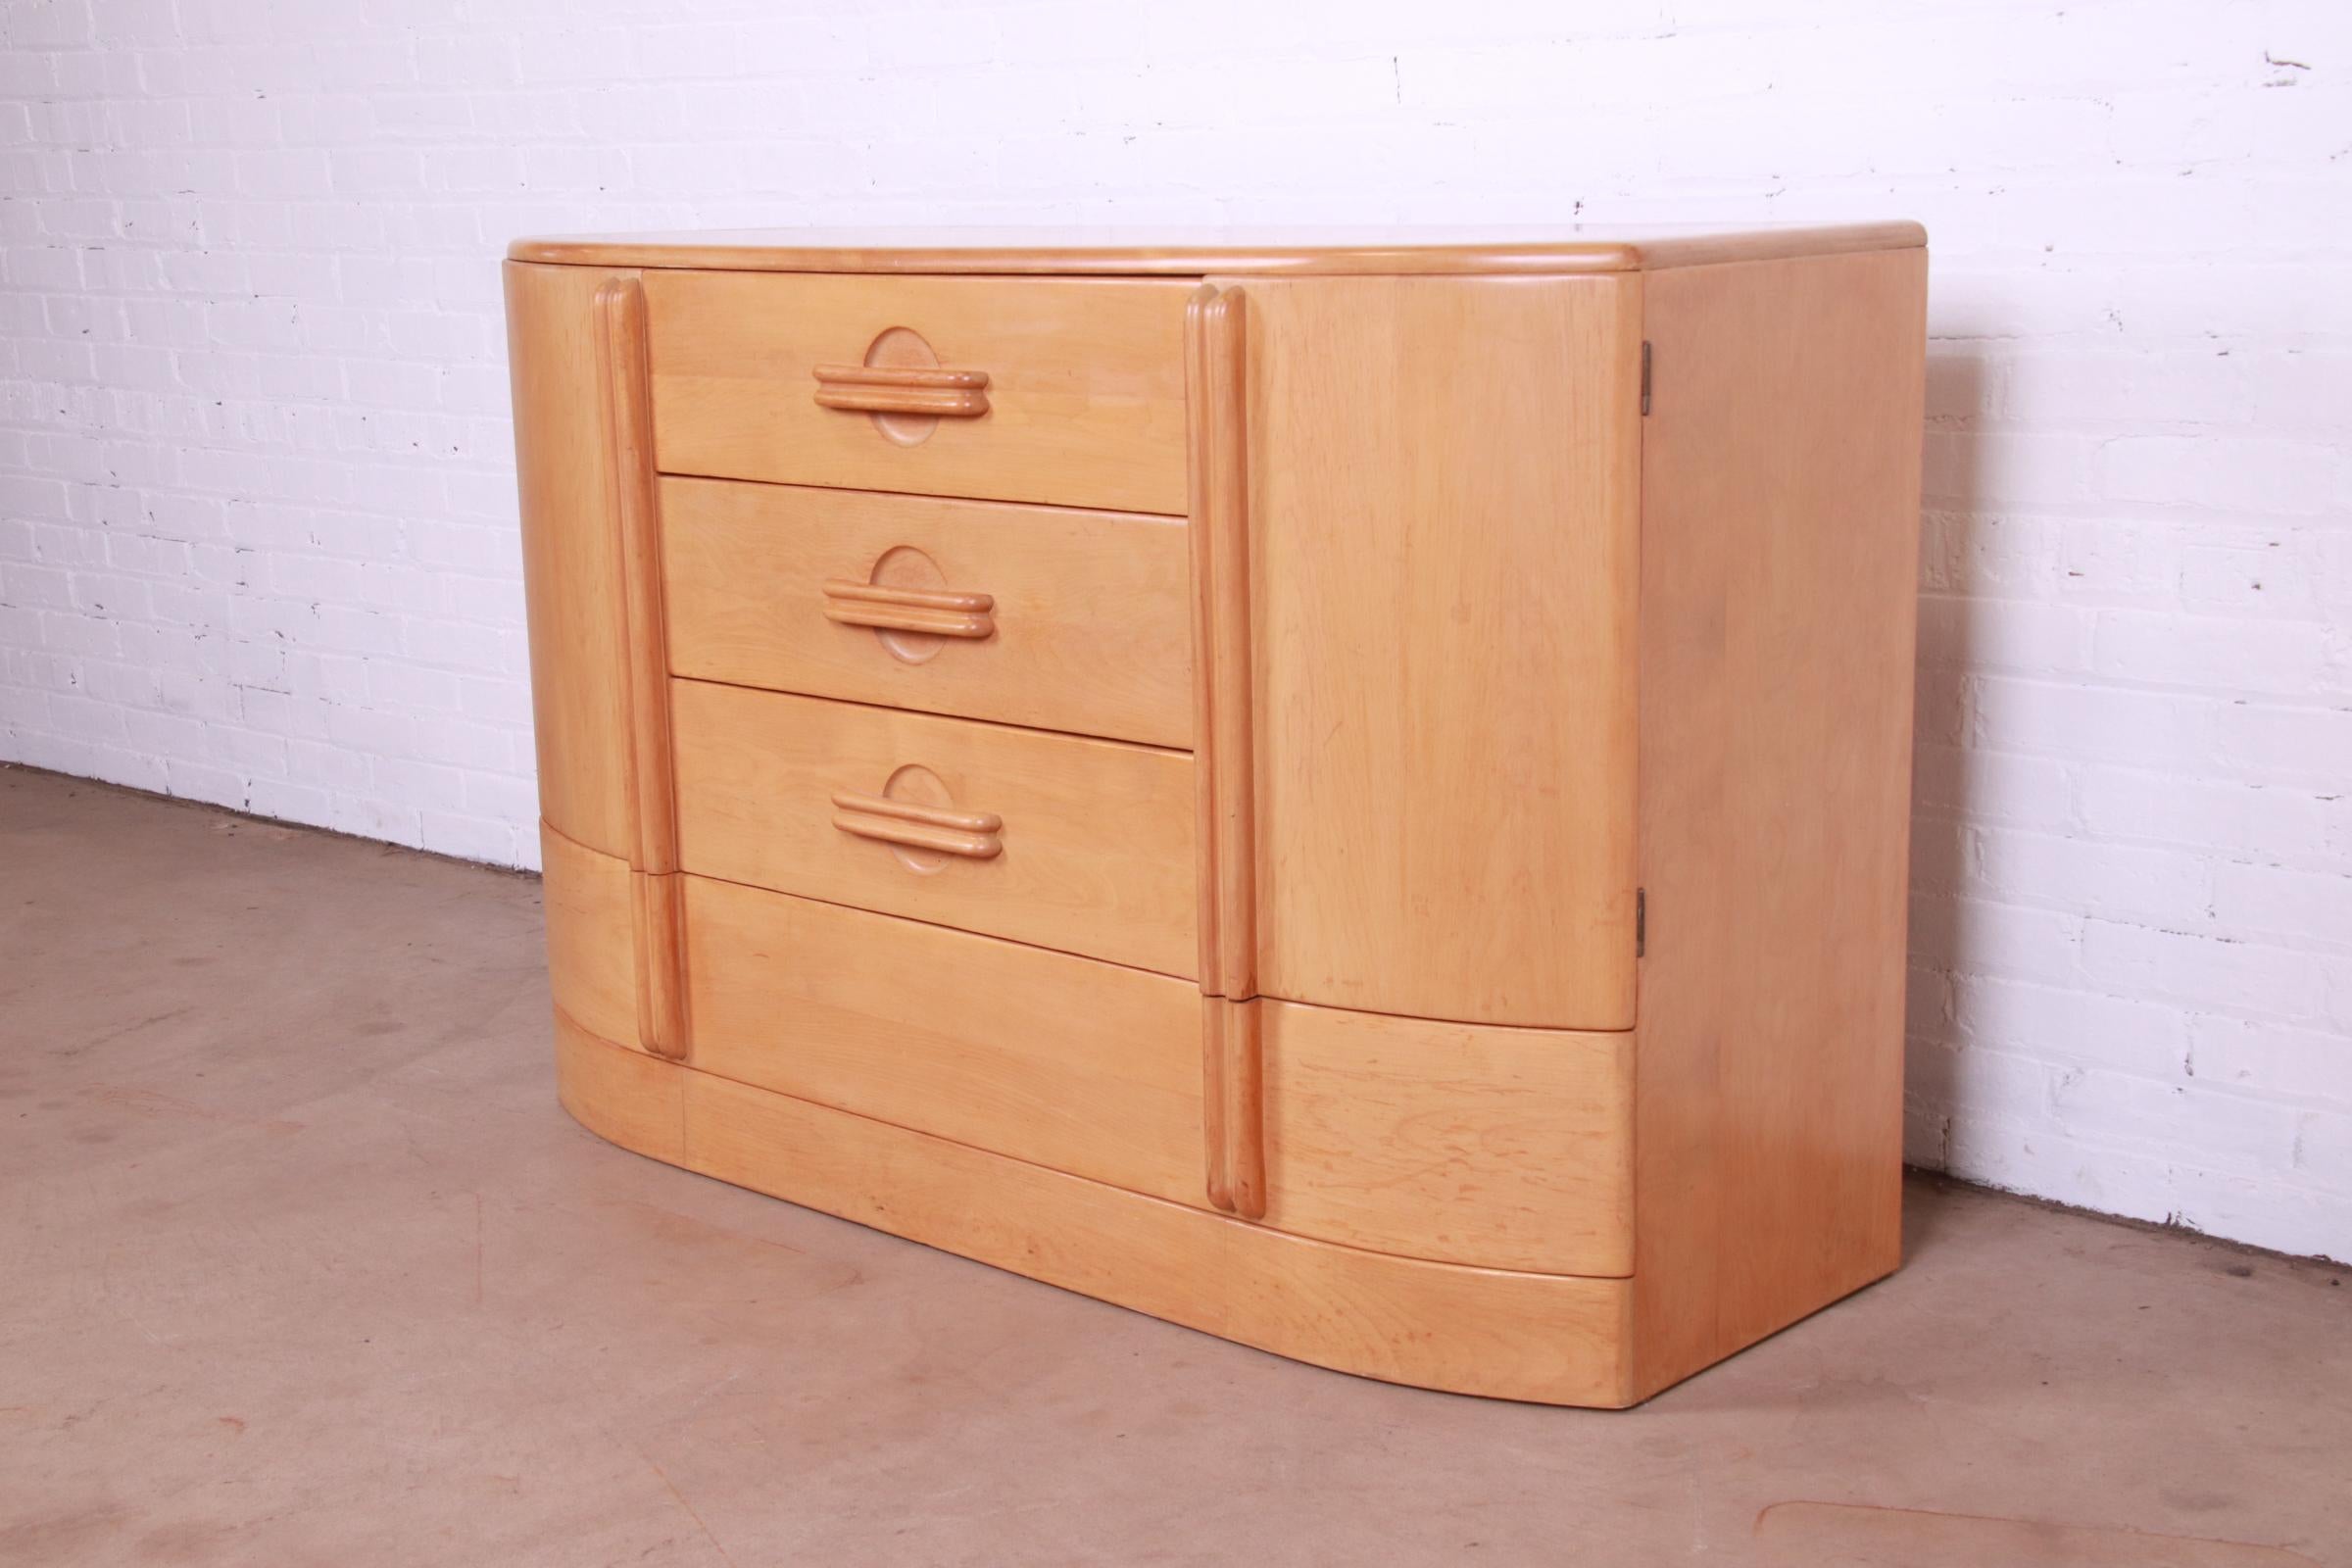 A gorgeous Art Deco or Mid-Century Modern sideboard, credenza, or bar cabinet

By Leo Jiranek for Heywood Wakefield, 